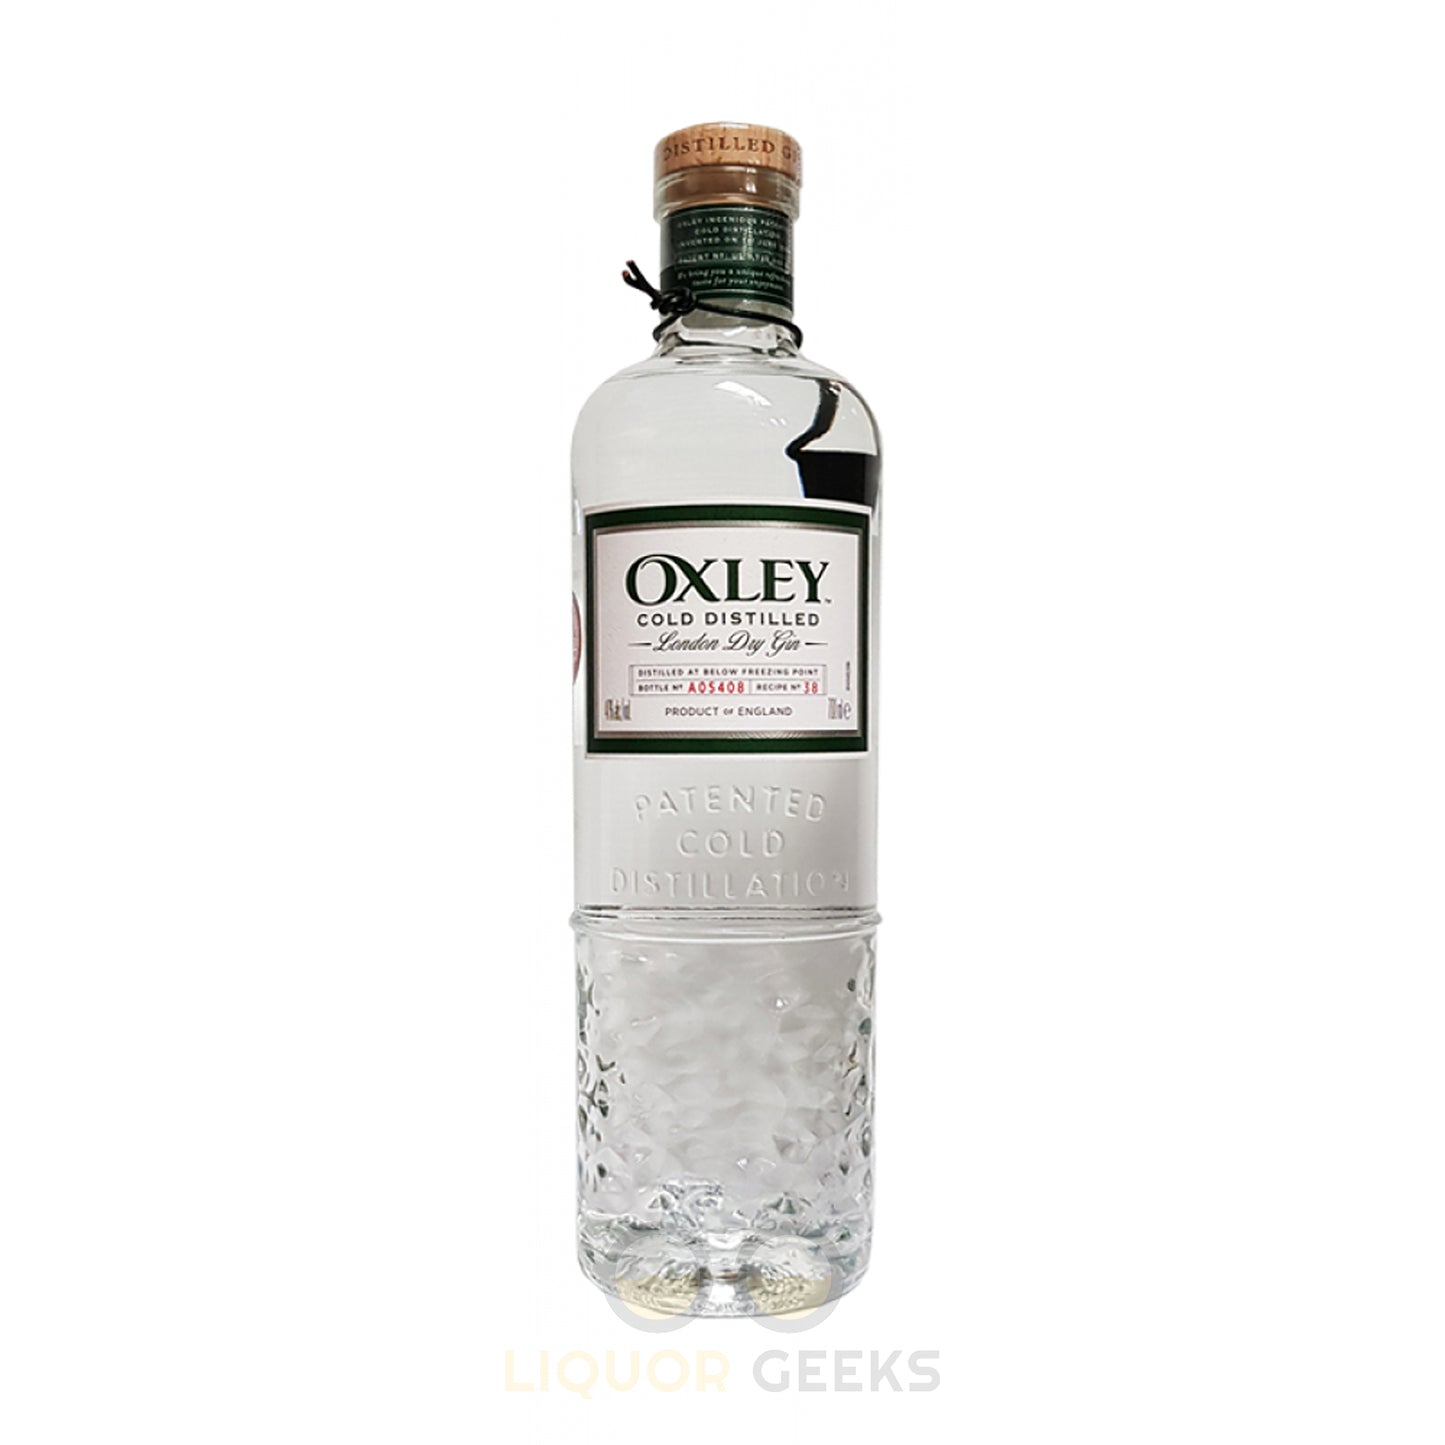 Oxley London Dry Gin Cold Distilled - Liquor Geeks